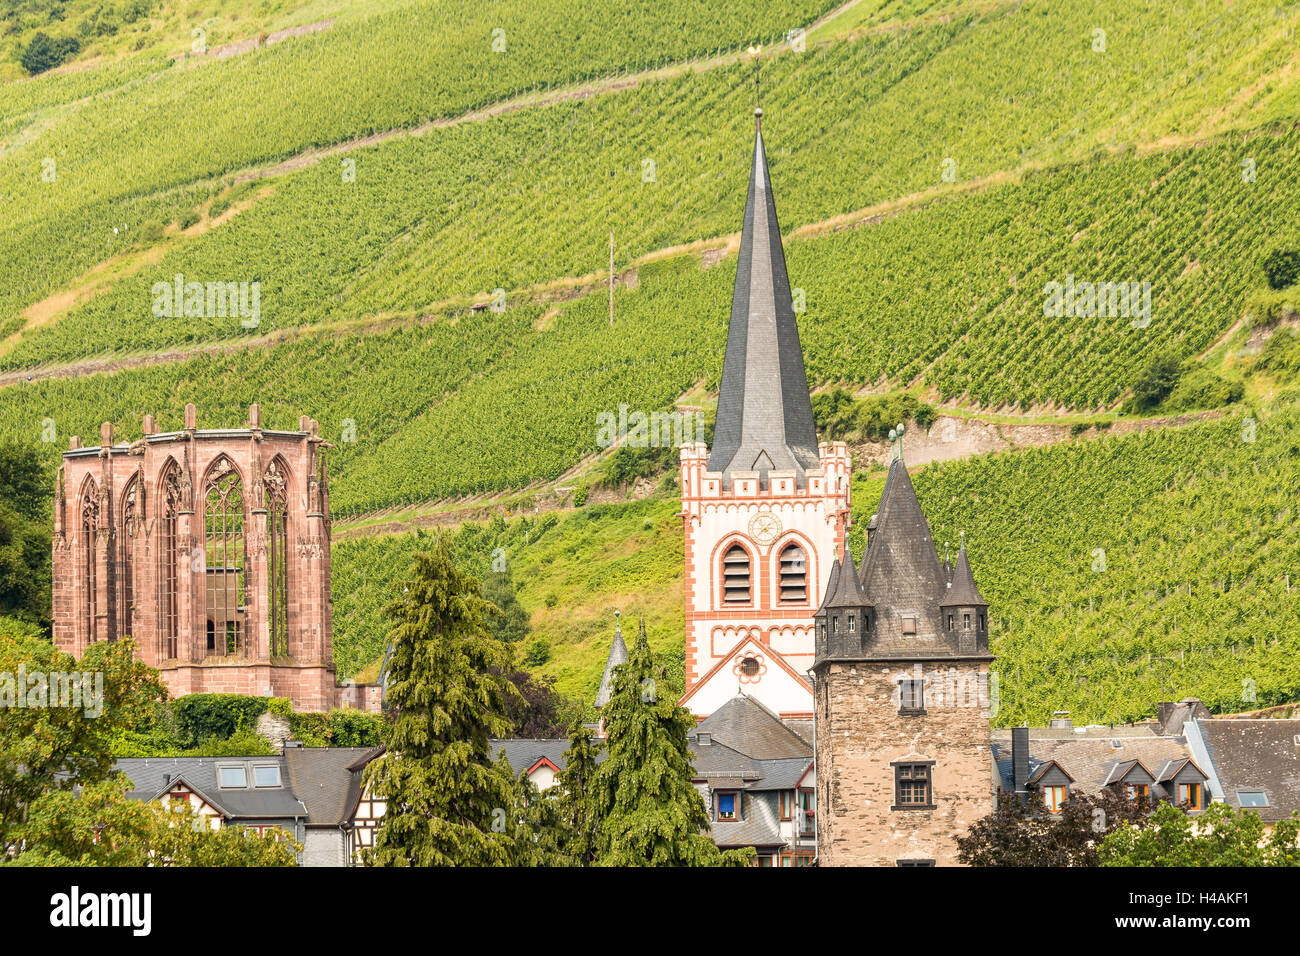 Wernerkappelle Werner Chapel Ruins,Bacharach, Rhine, Germany Stock Photo